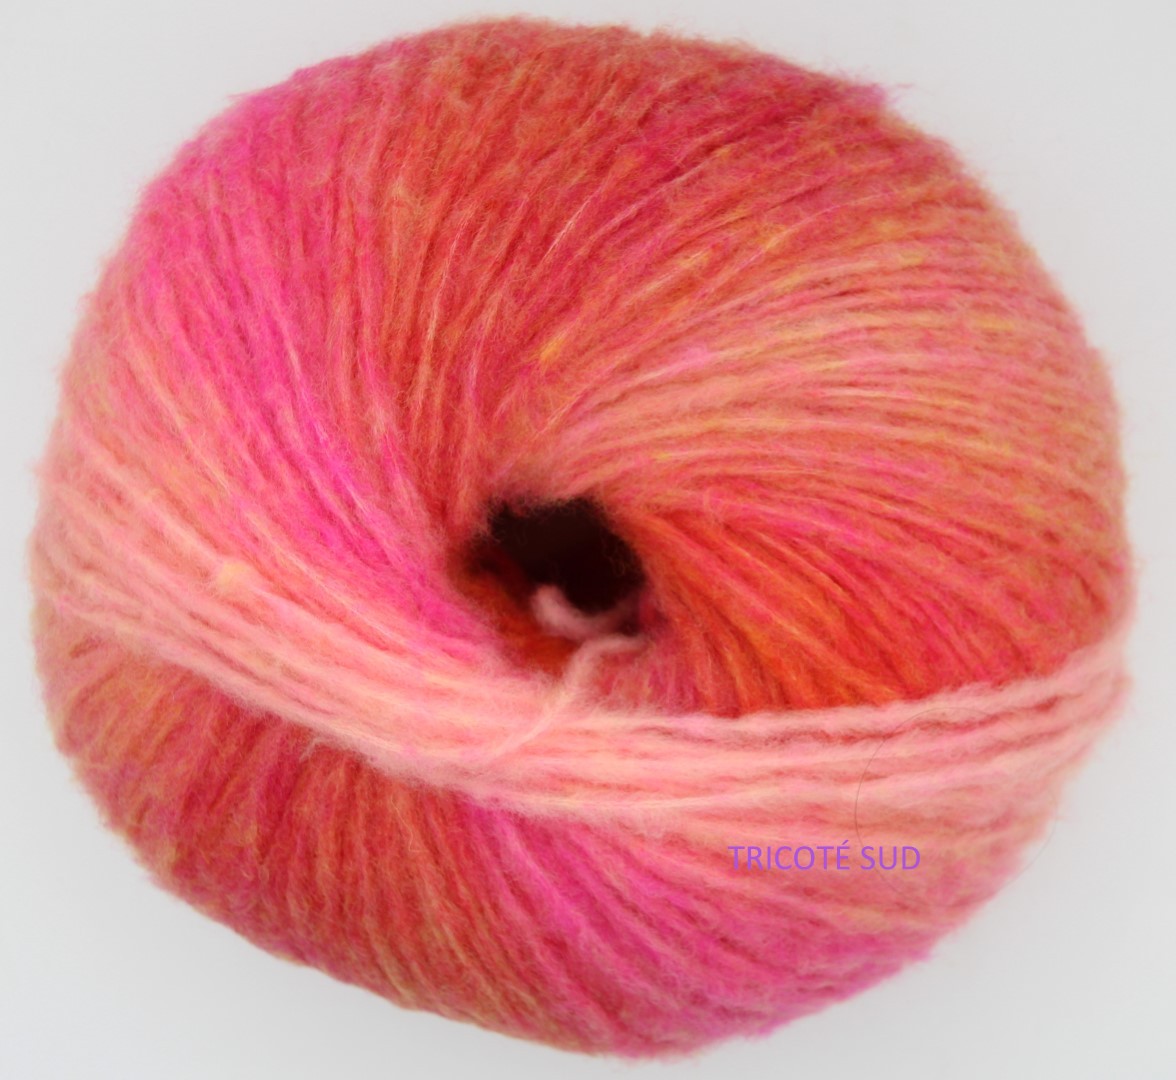 TRICOTE SUD LANG YARNS ORION COLORIS 01 (2) (Large)